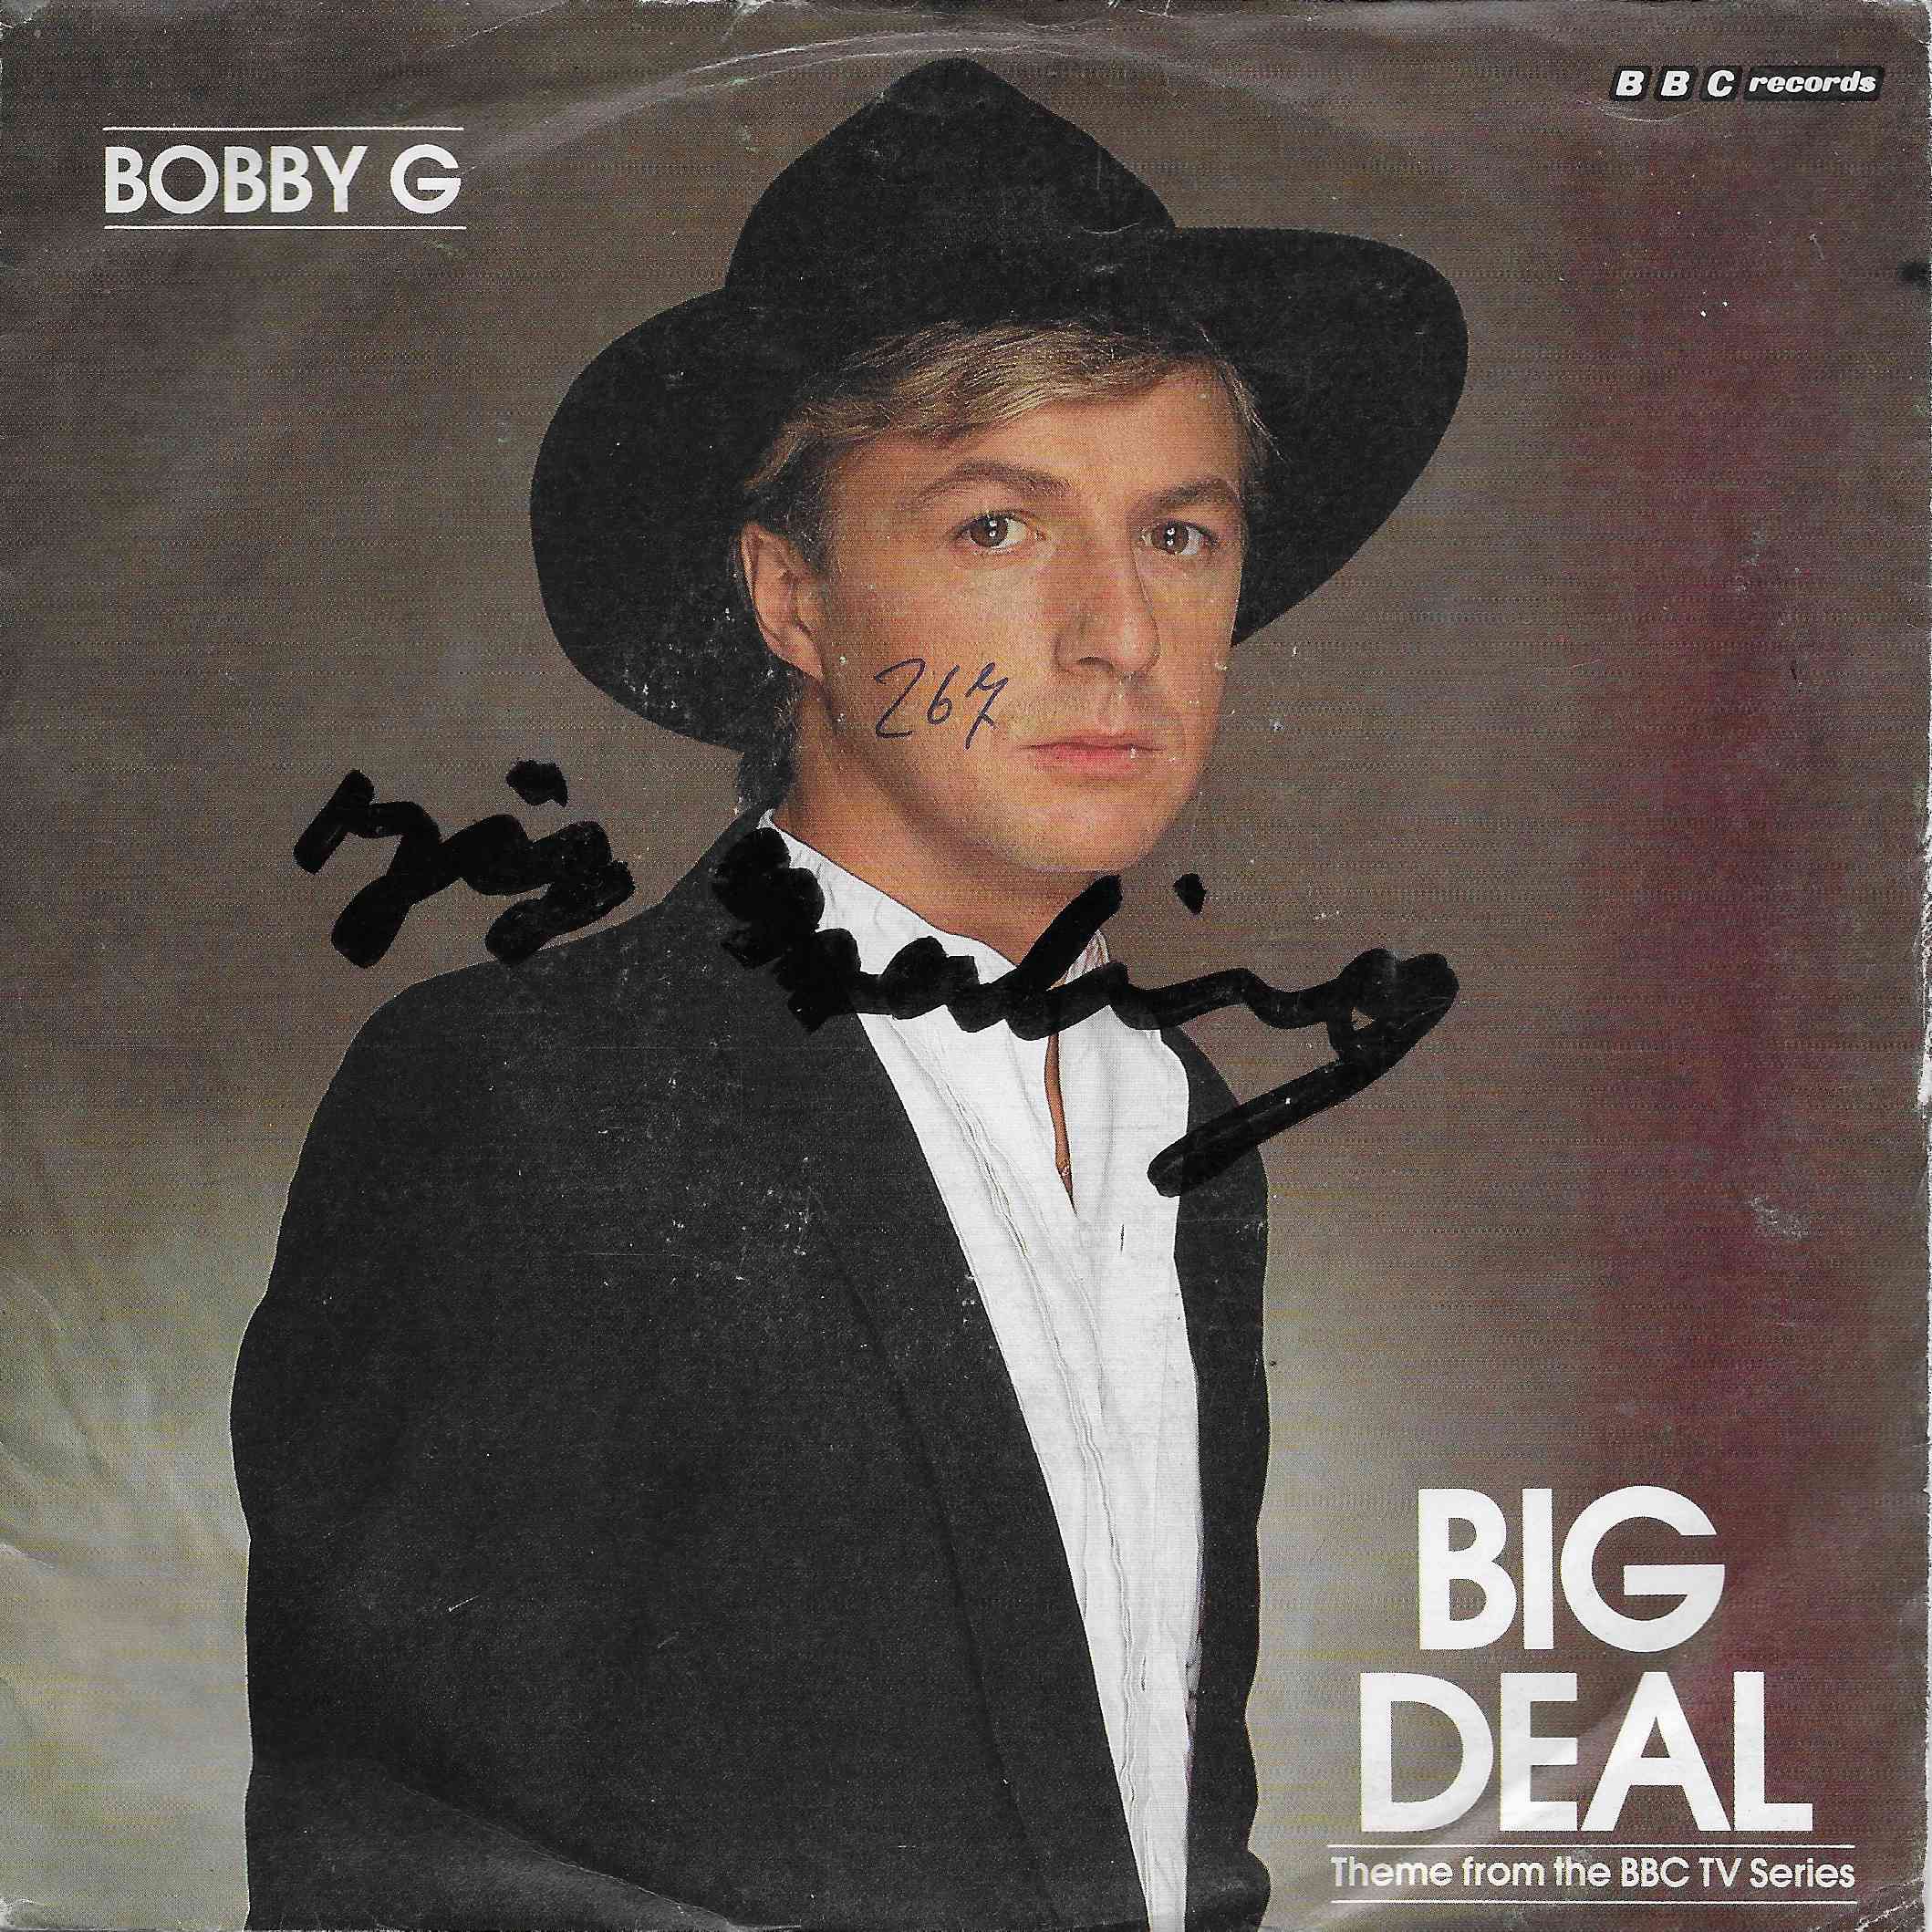 Picture of INT 113.009 Big Deal by artist Bobby G from the BBC records and Tapes library